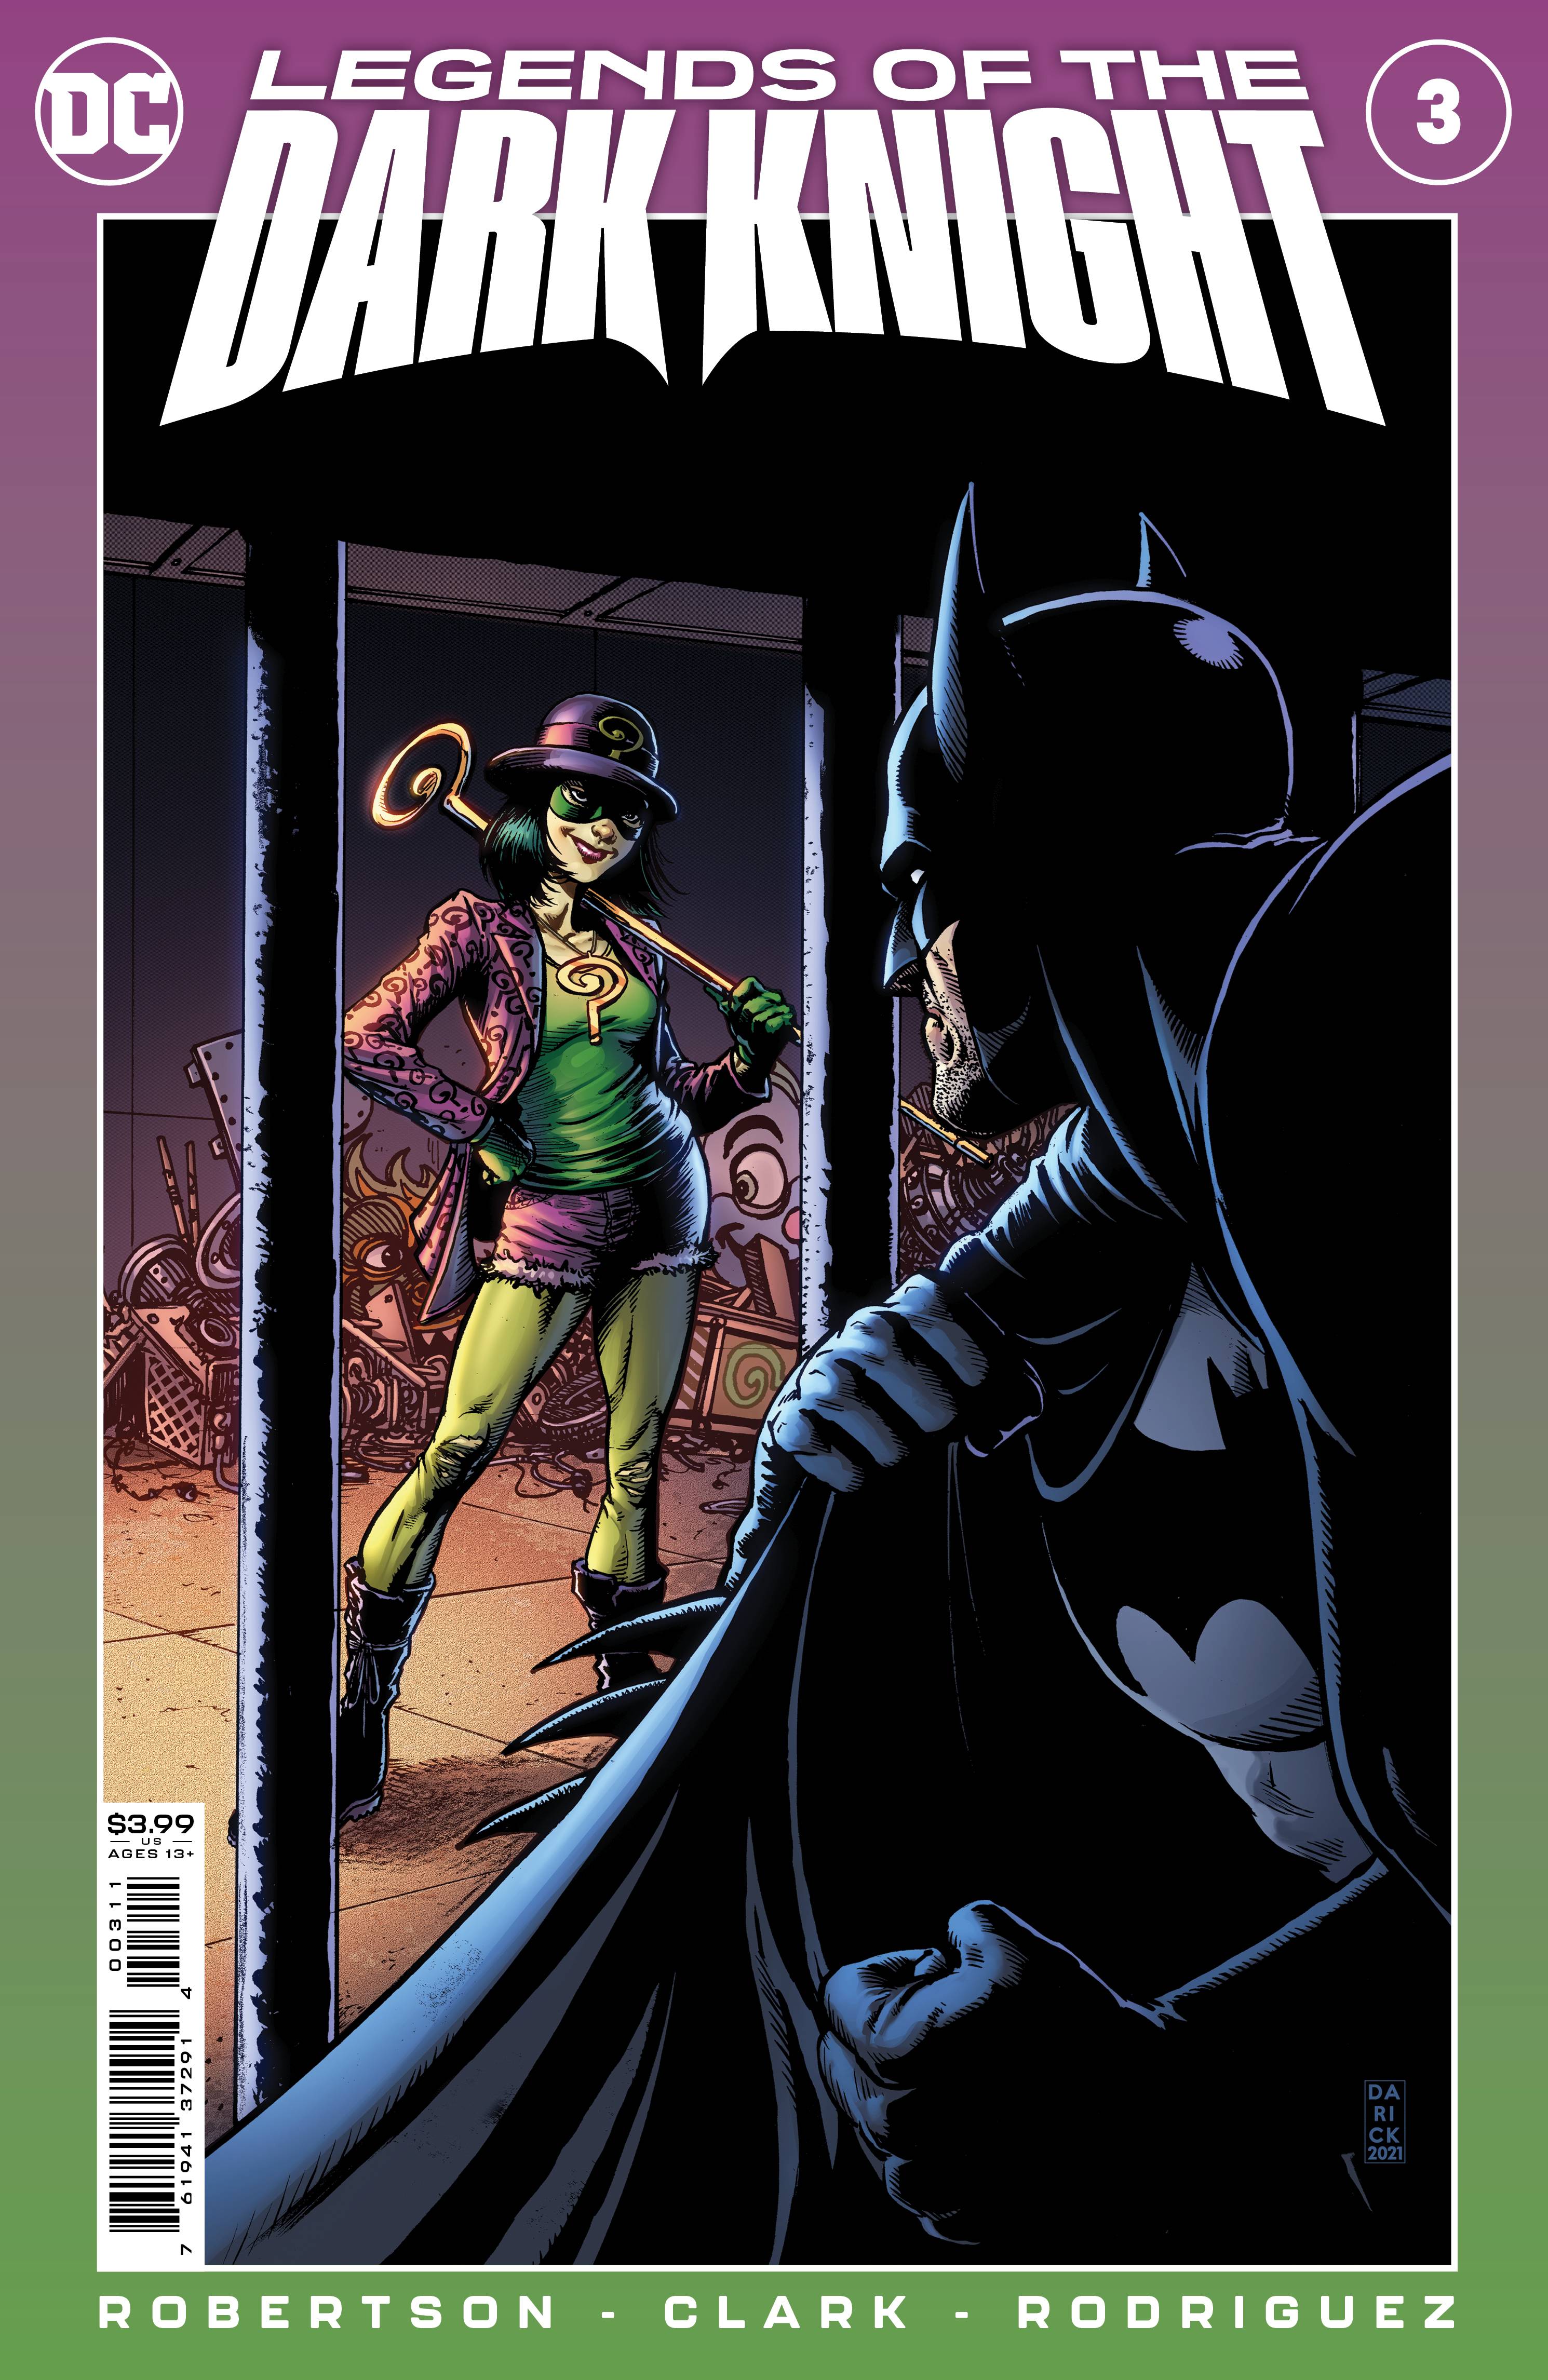 LEGENDS OF DARK KNIGHT #3 CVR A ROBERTS | Game Master's Emporium (The New GME)